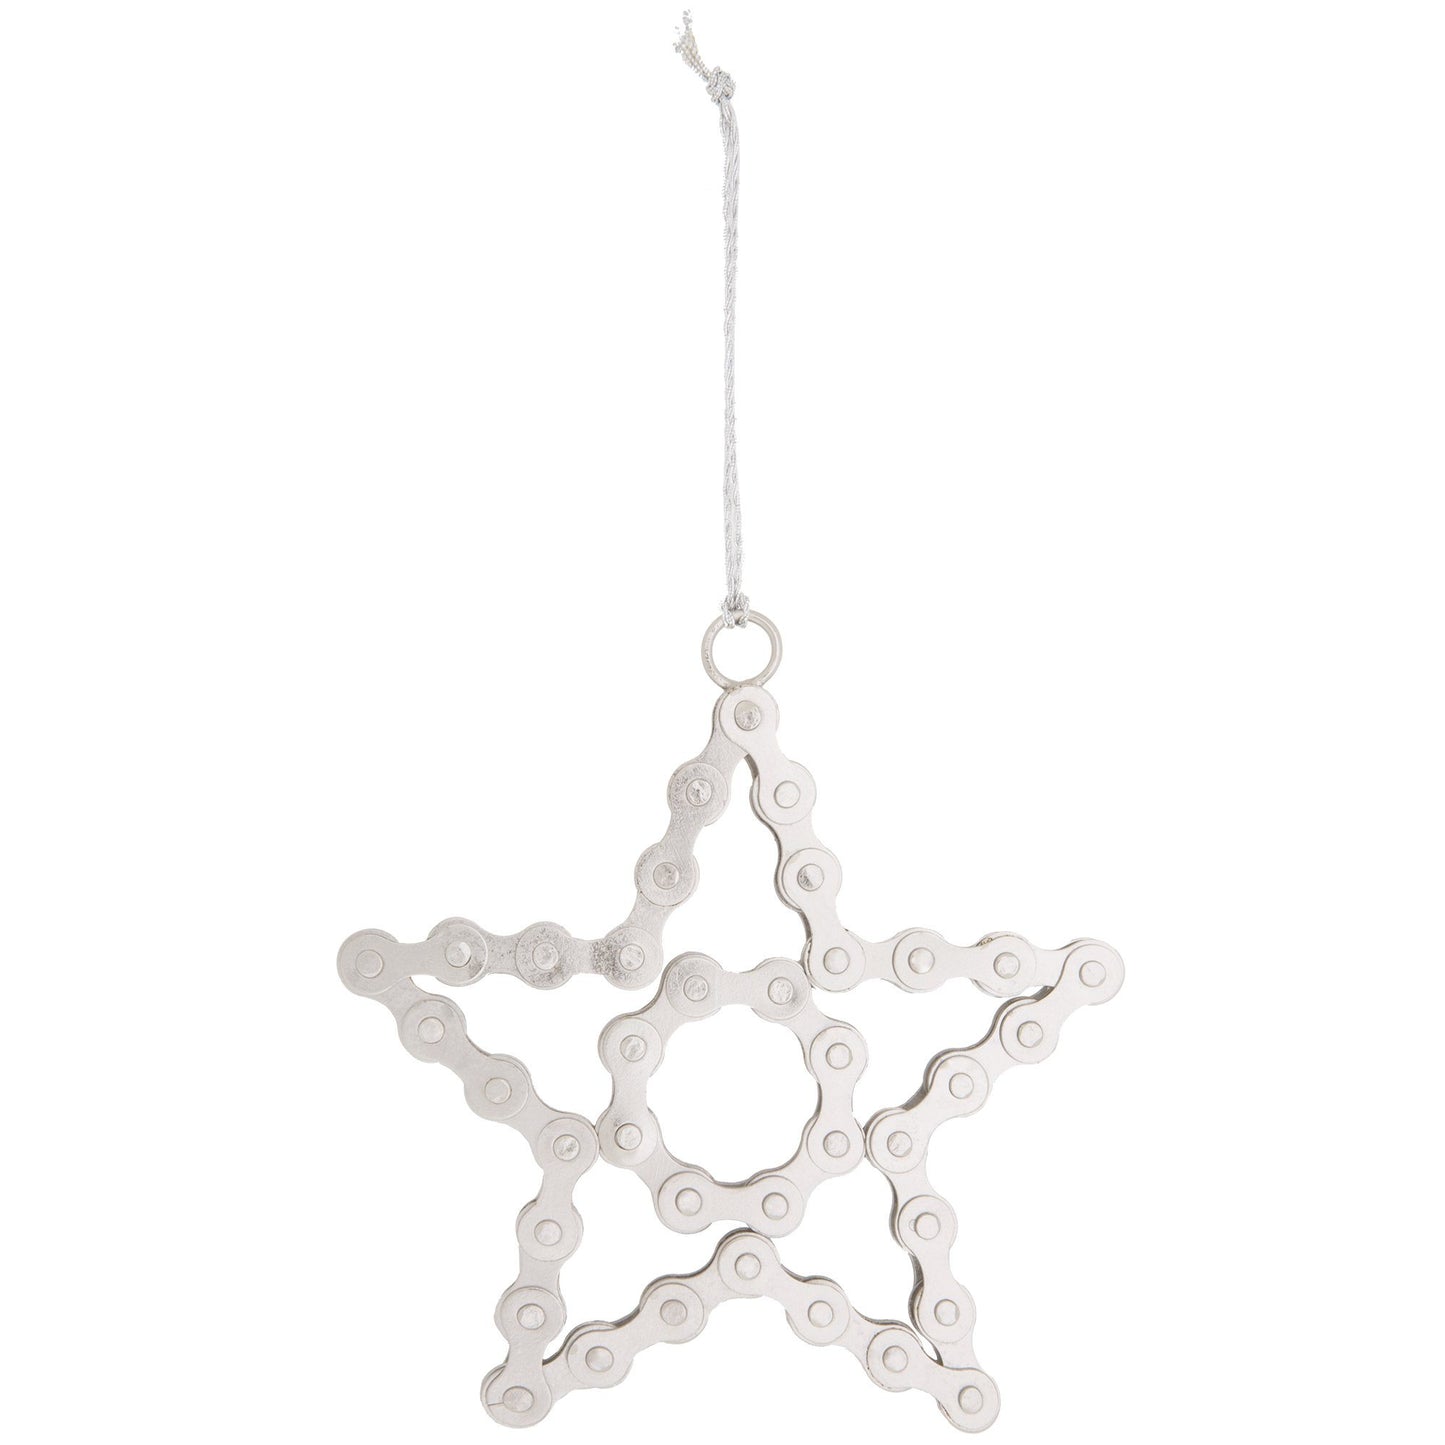 Recycled Bicycle Chain Star Ornament